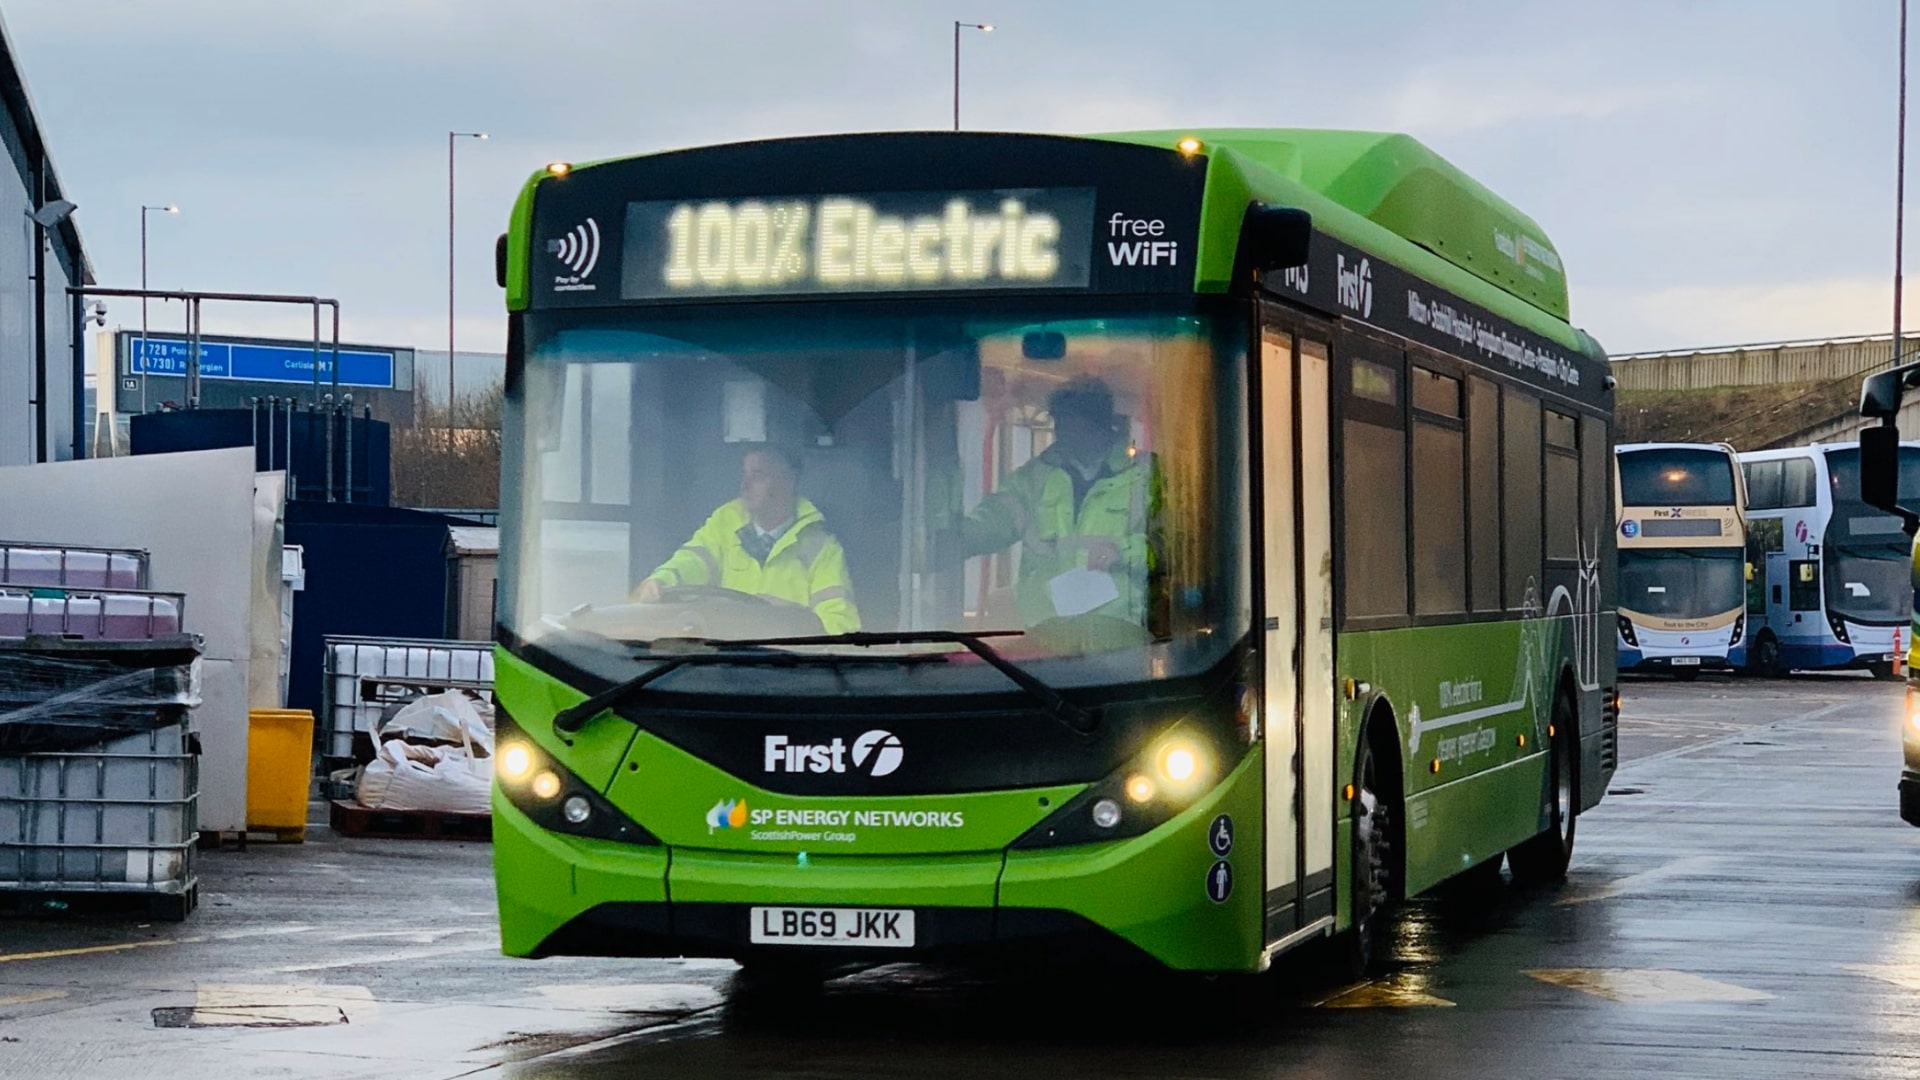 Electric buses come to Glasgow as city aims for zero' emissions